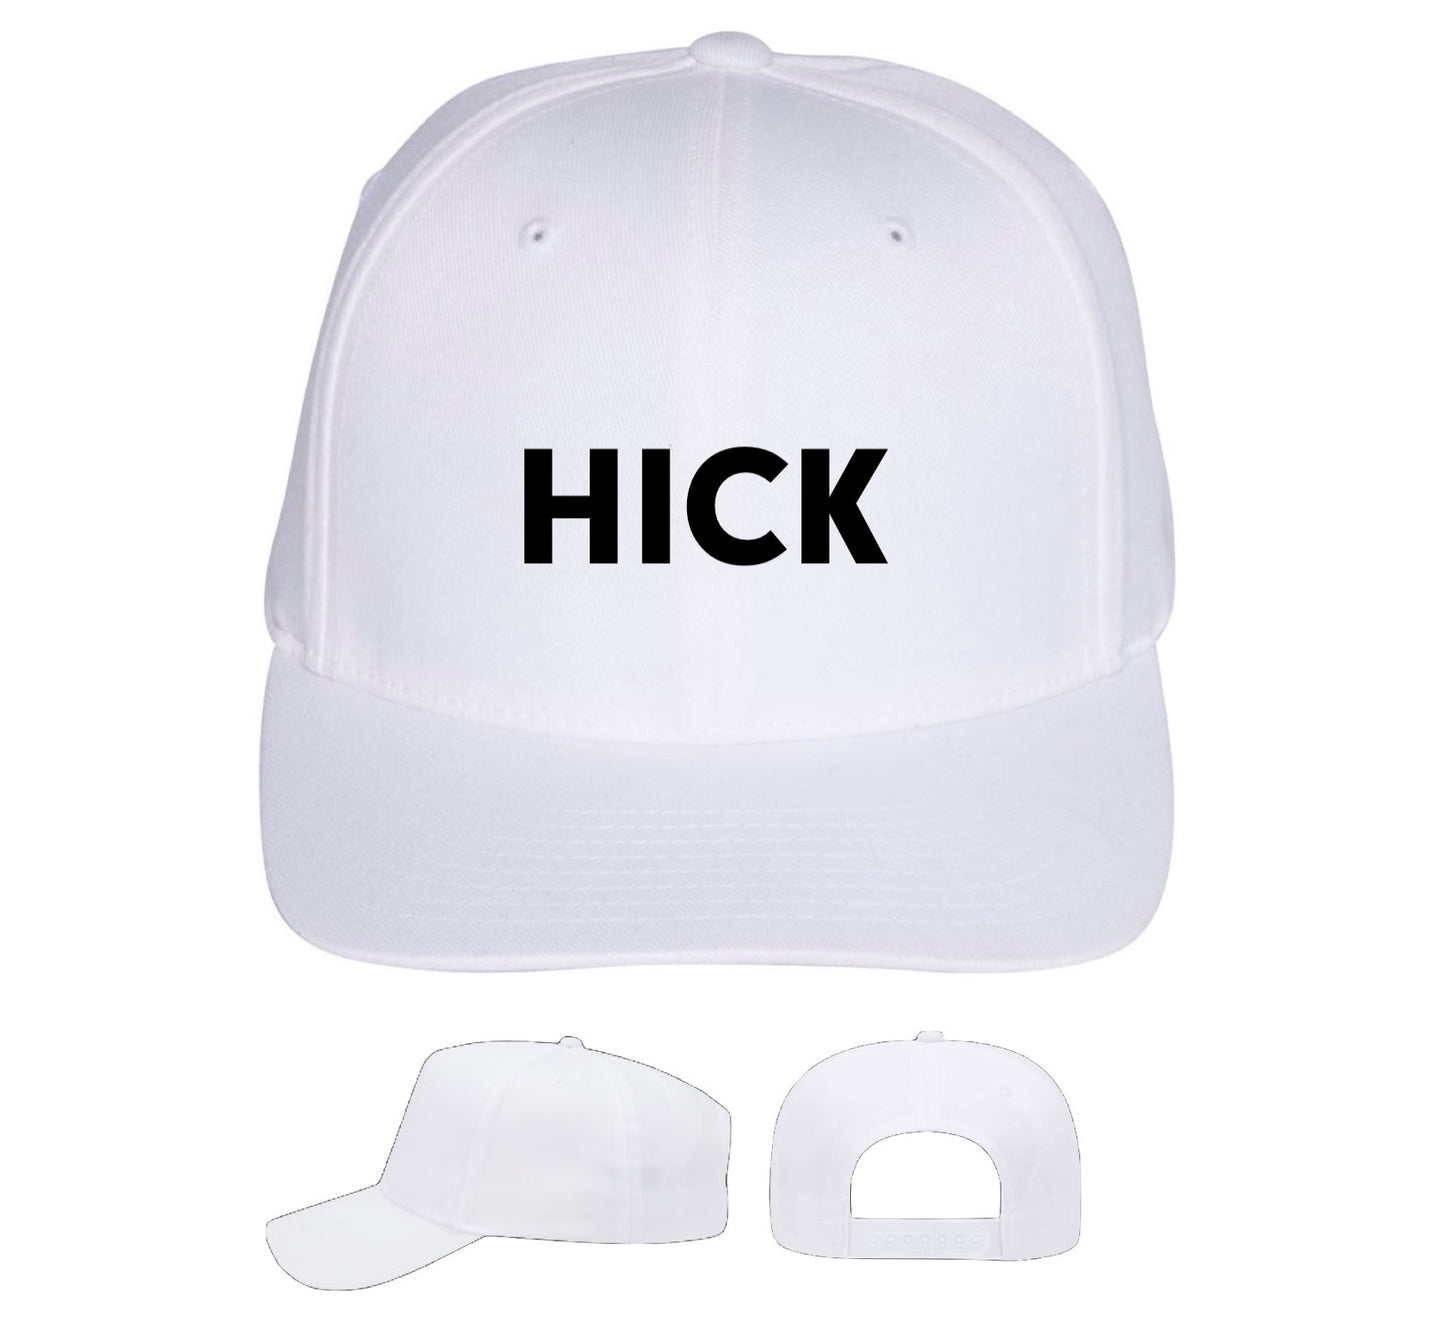 HICK Hat (FREE Shipping)